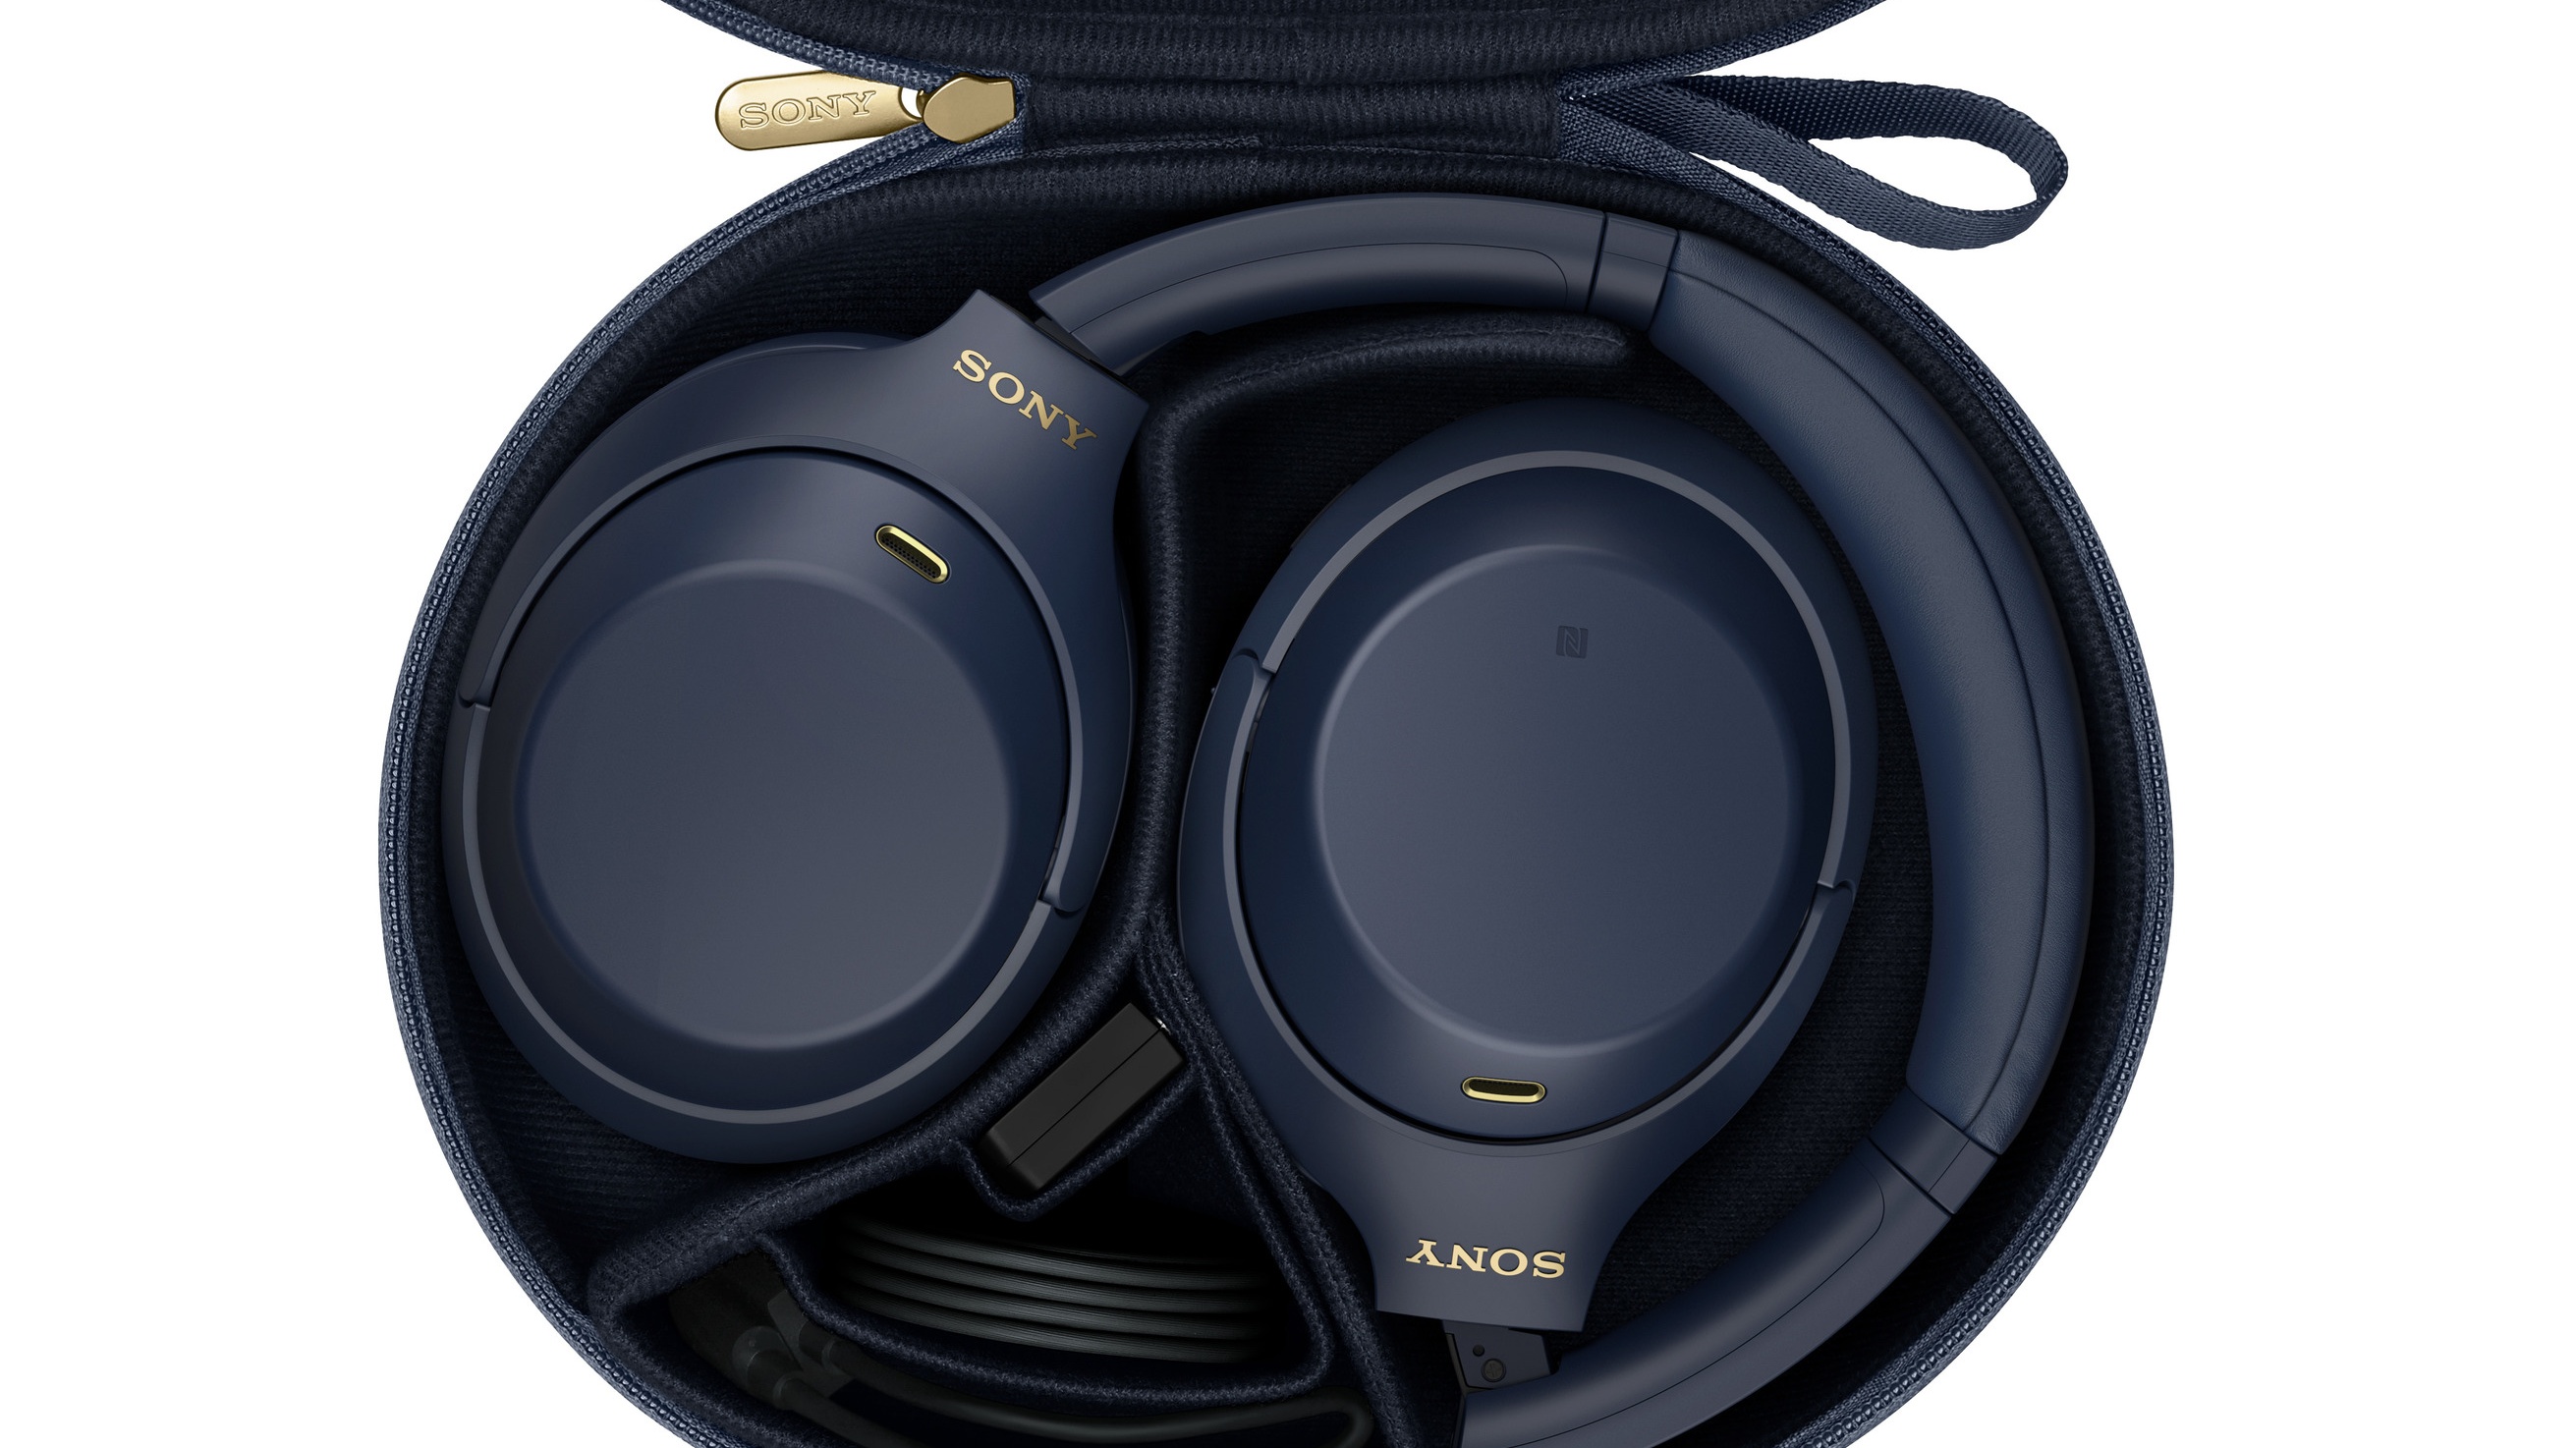 Sony's WH-1000XM4 wireless headphones get a new 'Midnight Blue 